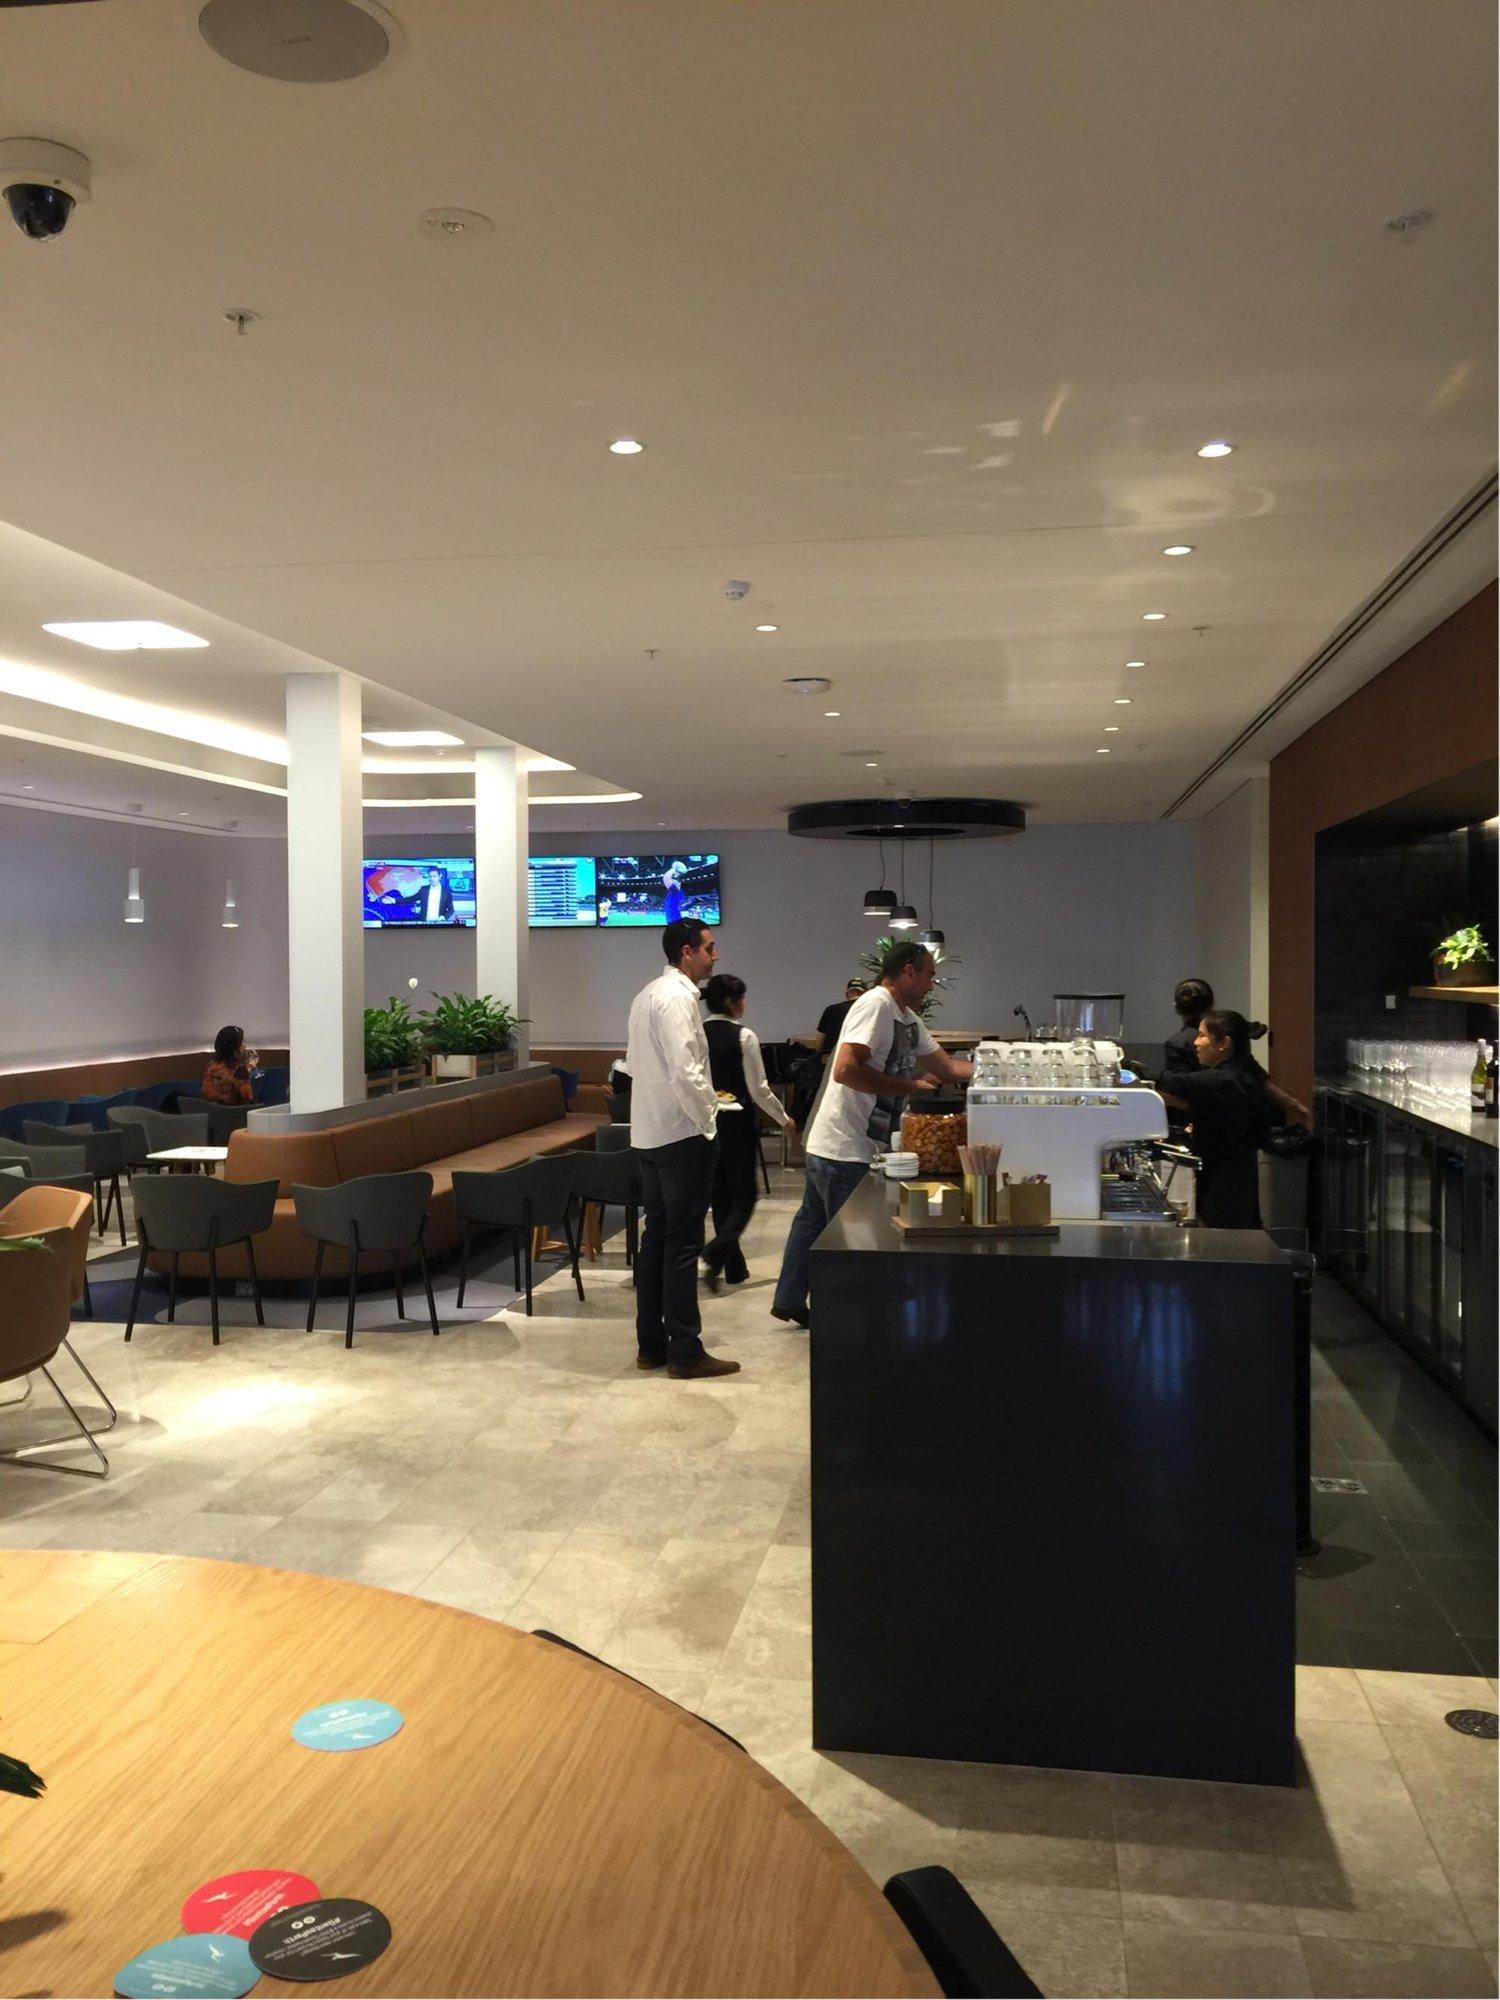 Qantas Airways Domestic and International Business Lounge image 1 of 5